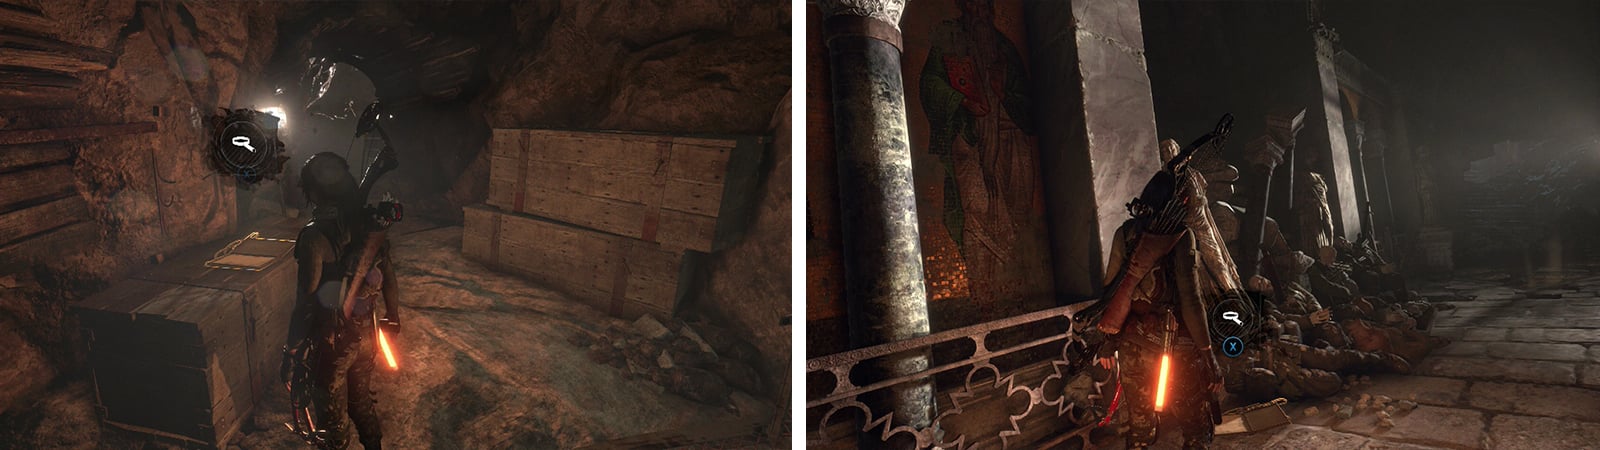 At the top of the first room you'll find Document 01 (left). When you reached the paved area, Document 02 can be found along the left wall (right).